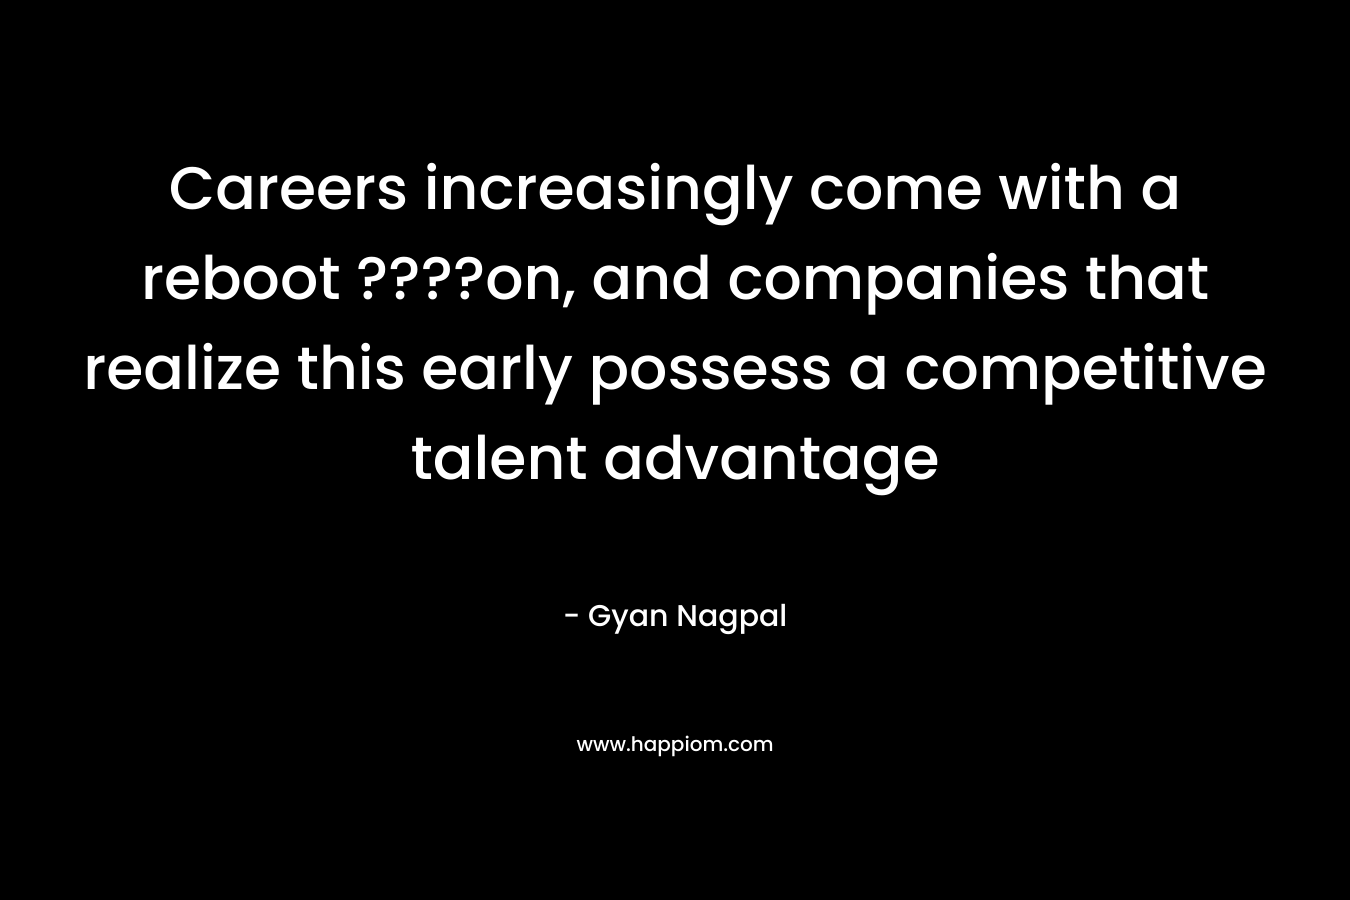 Careers increasingly come with a reboot ????on, and companies that realize this early possess a competitive talent advantage